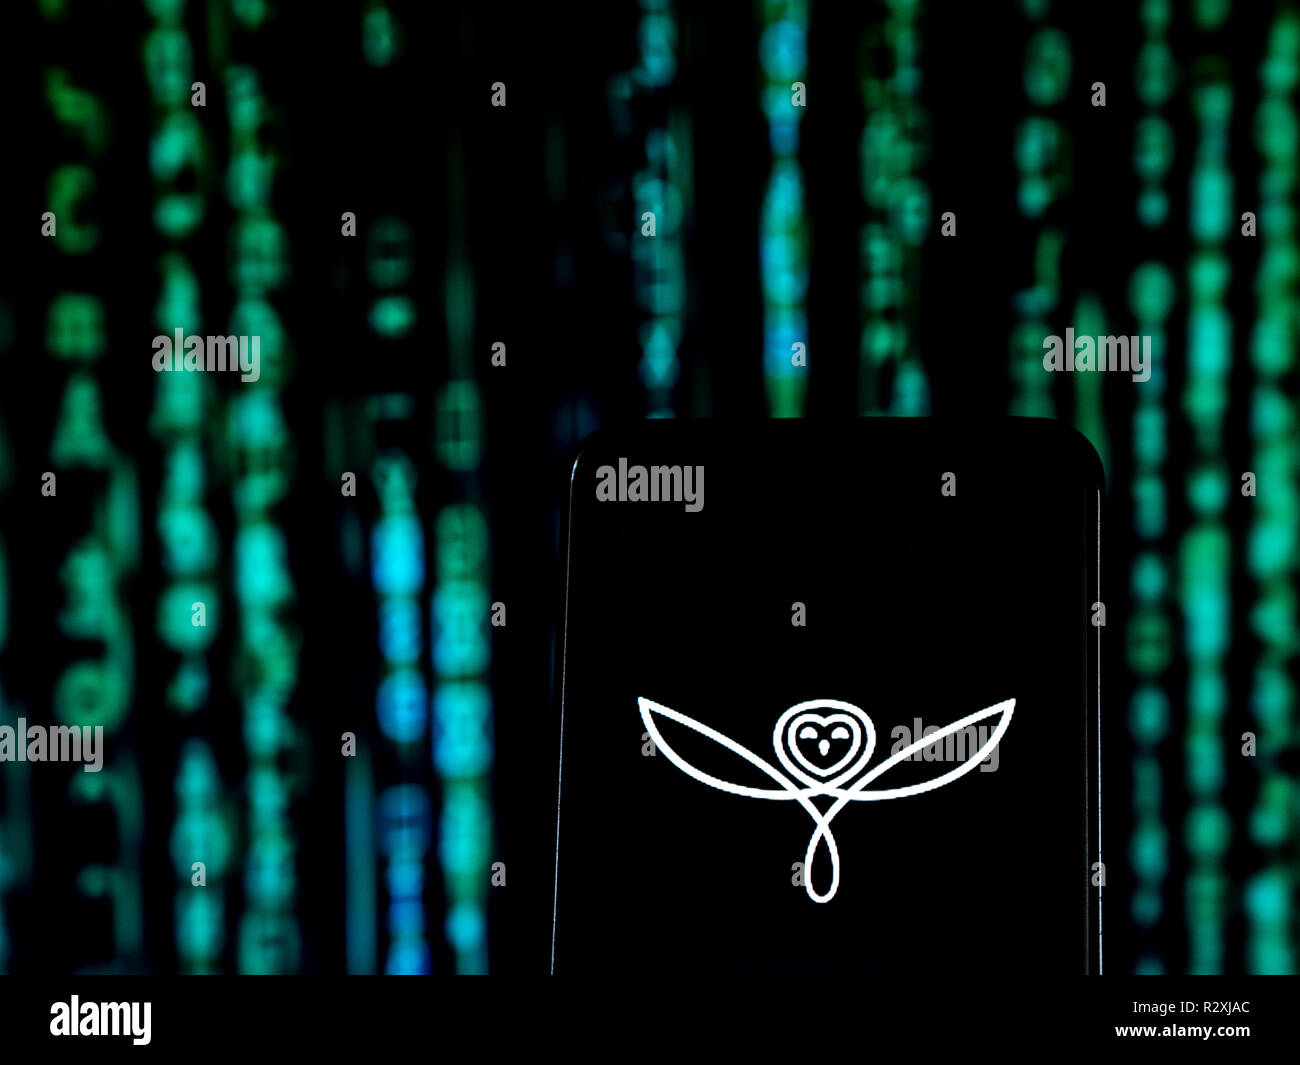 Kering Luxury goods company logo seen displayed on a smart phone. Kering  S.A. is an international luxury group based in Paris, France. It owns  luxury goods brands, including Gucci, Yves Saint Laurent,